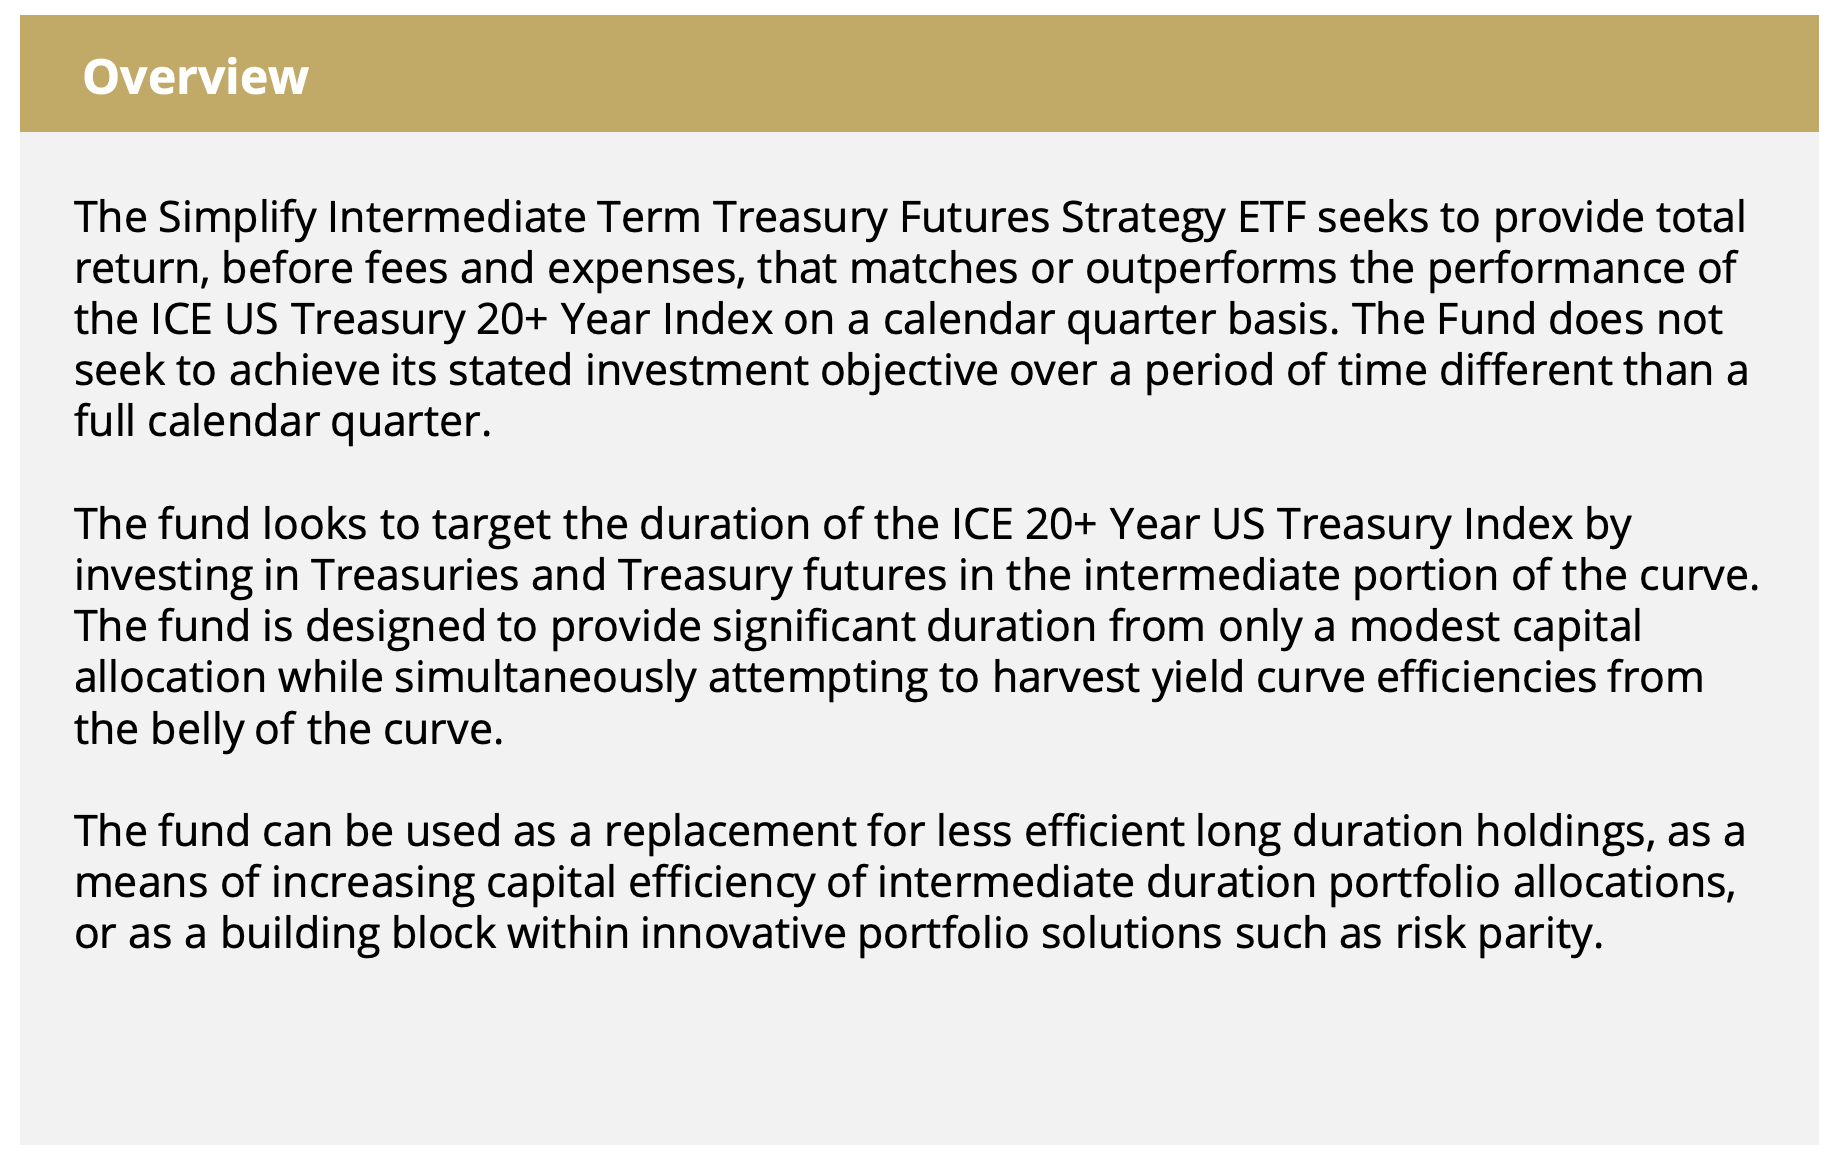 Simplify Overview of TYA ETF 